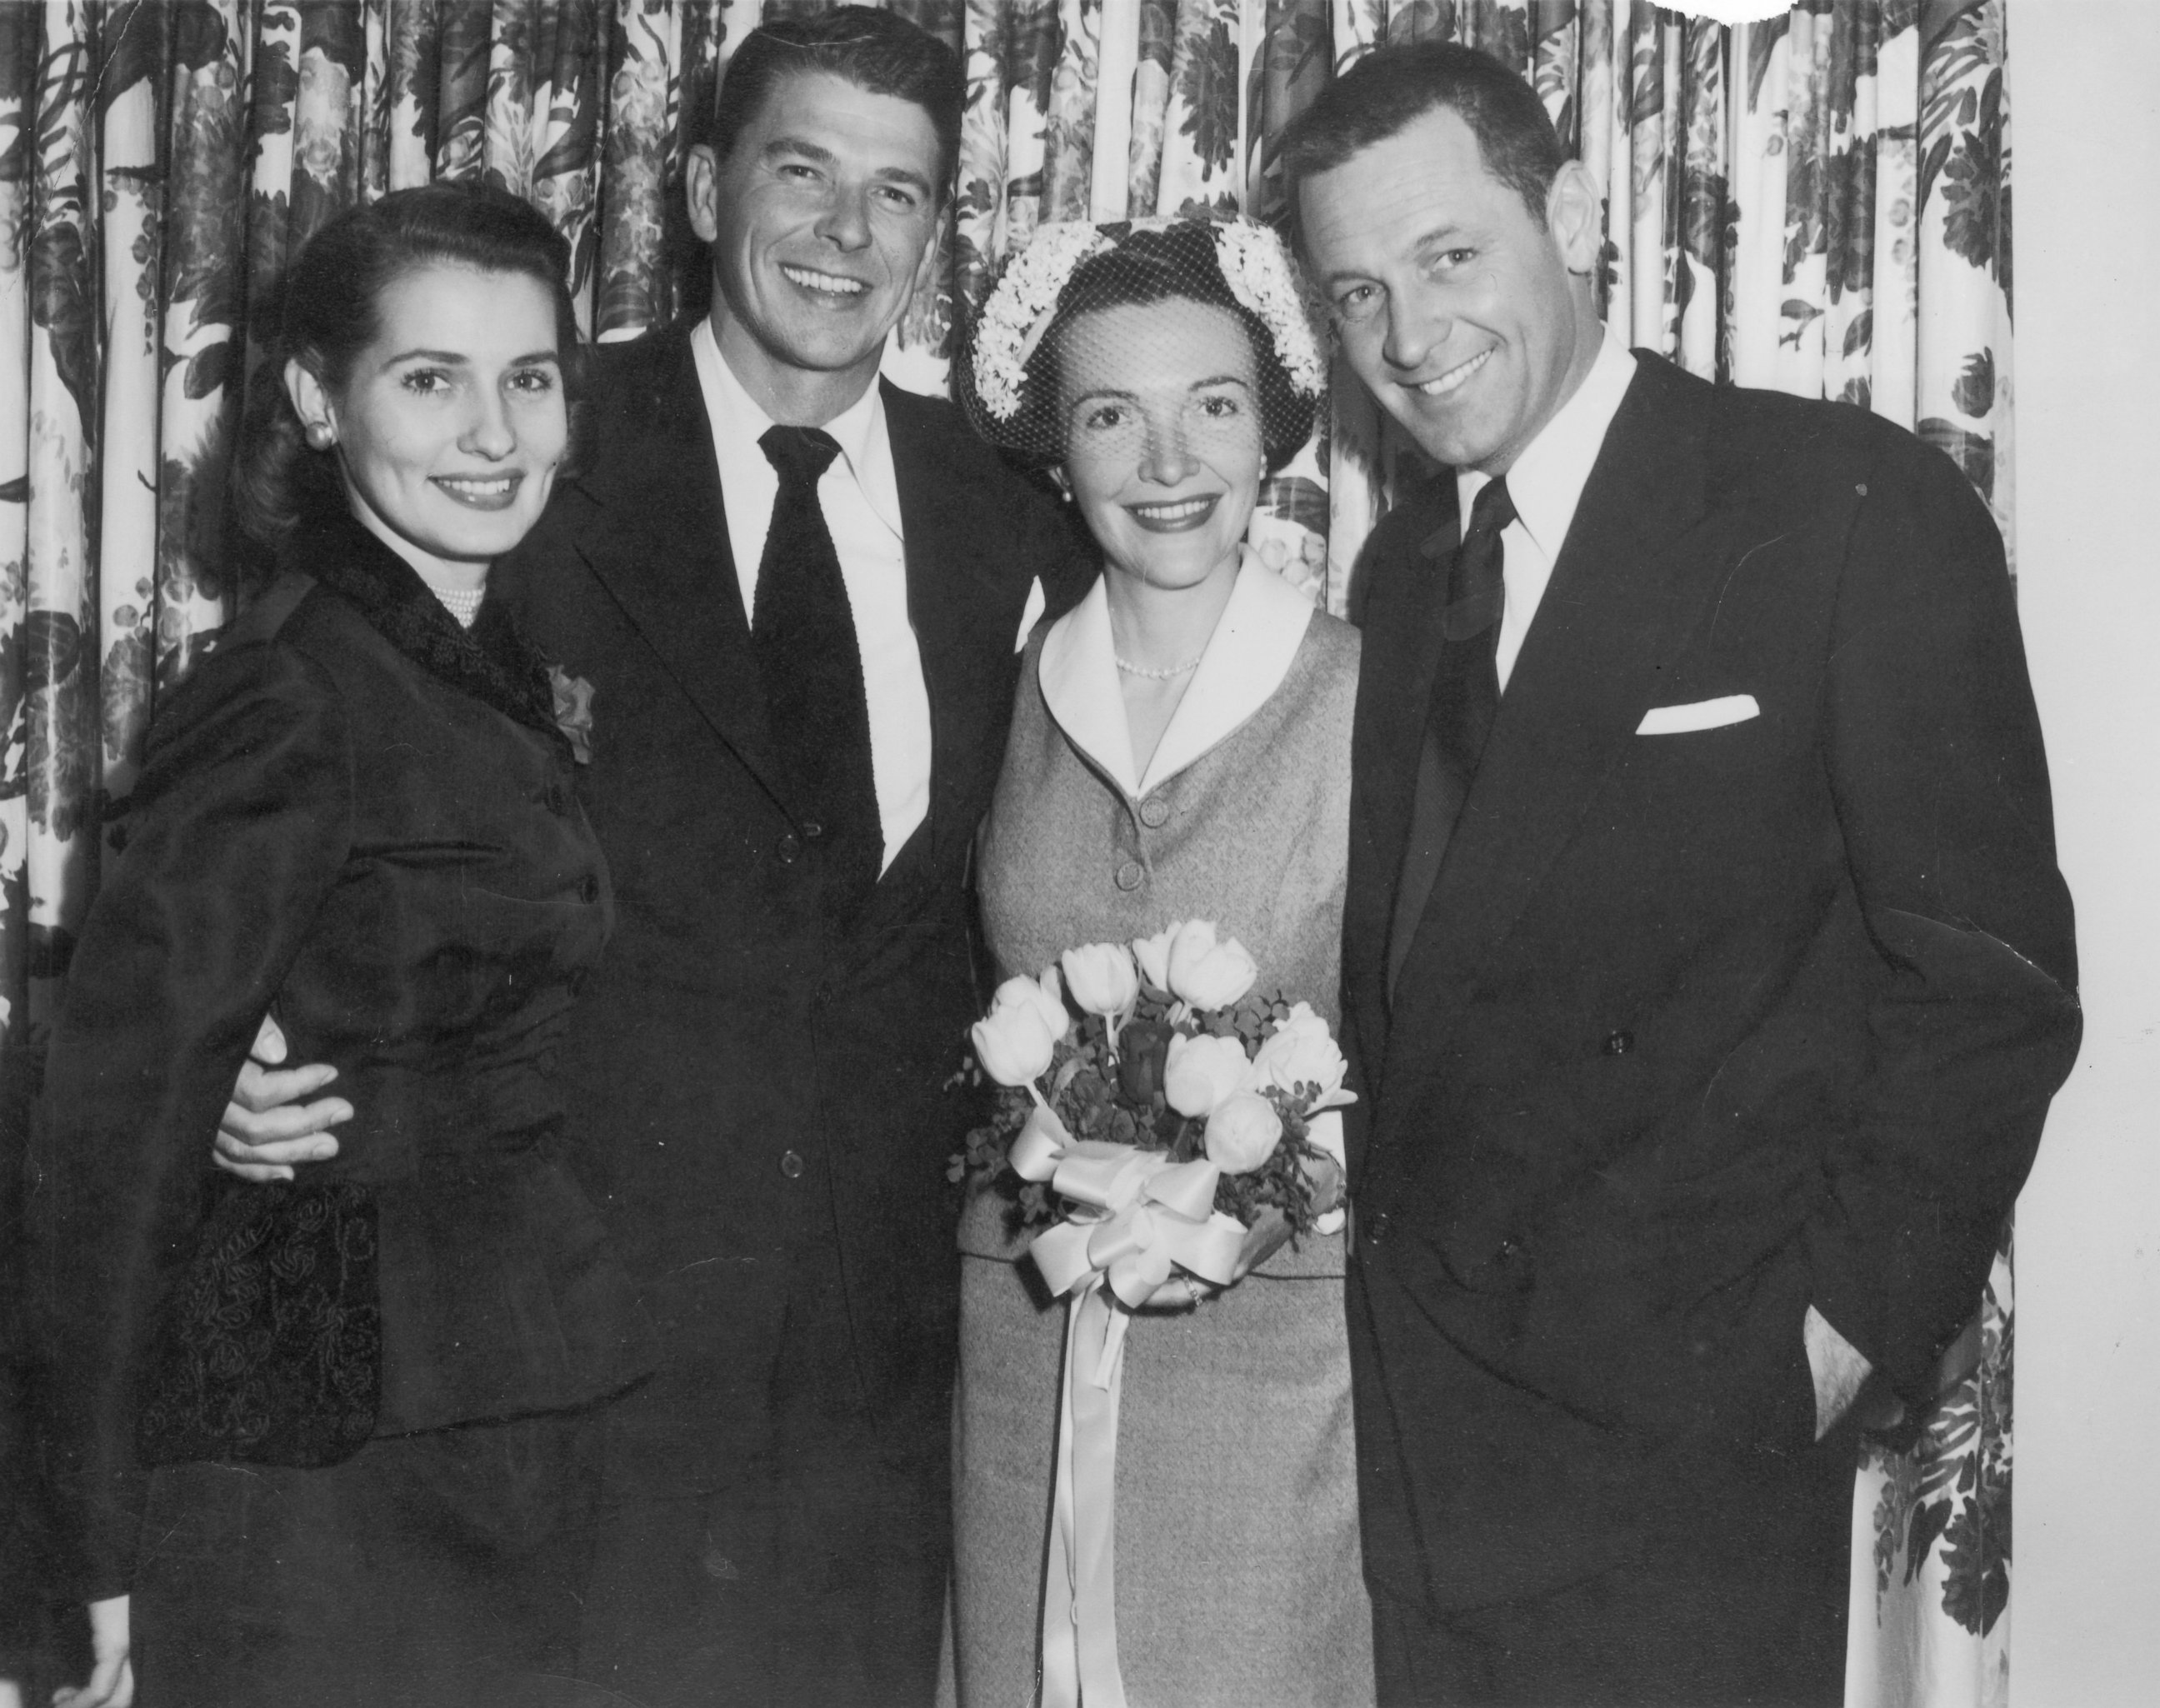 PHOTO: Portrait of American actors Ronald Reagan and Nancy Davis (center) on their wedding day with their arms wrapped around Best Man, American actor William Holden, and Maid of Honor, Phillipine-born actor Brenda Marshall, circa 1952.  